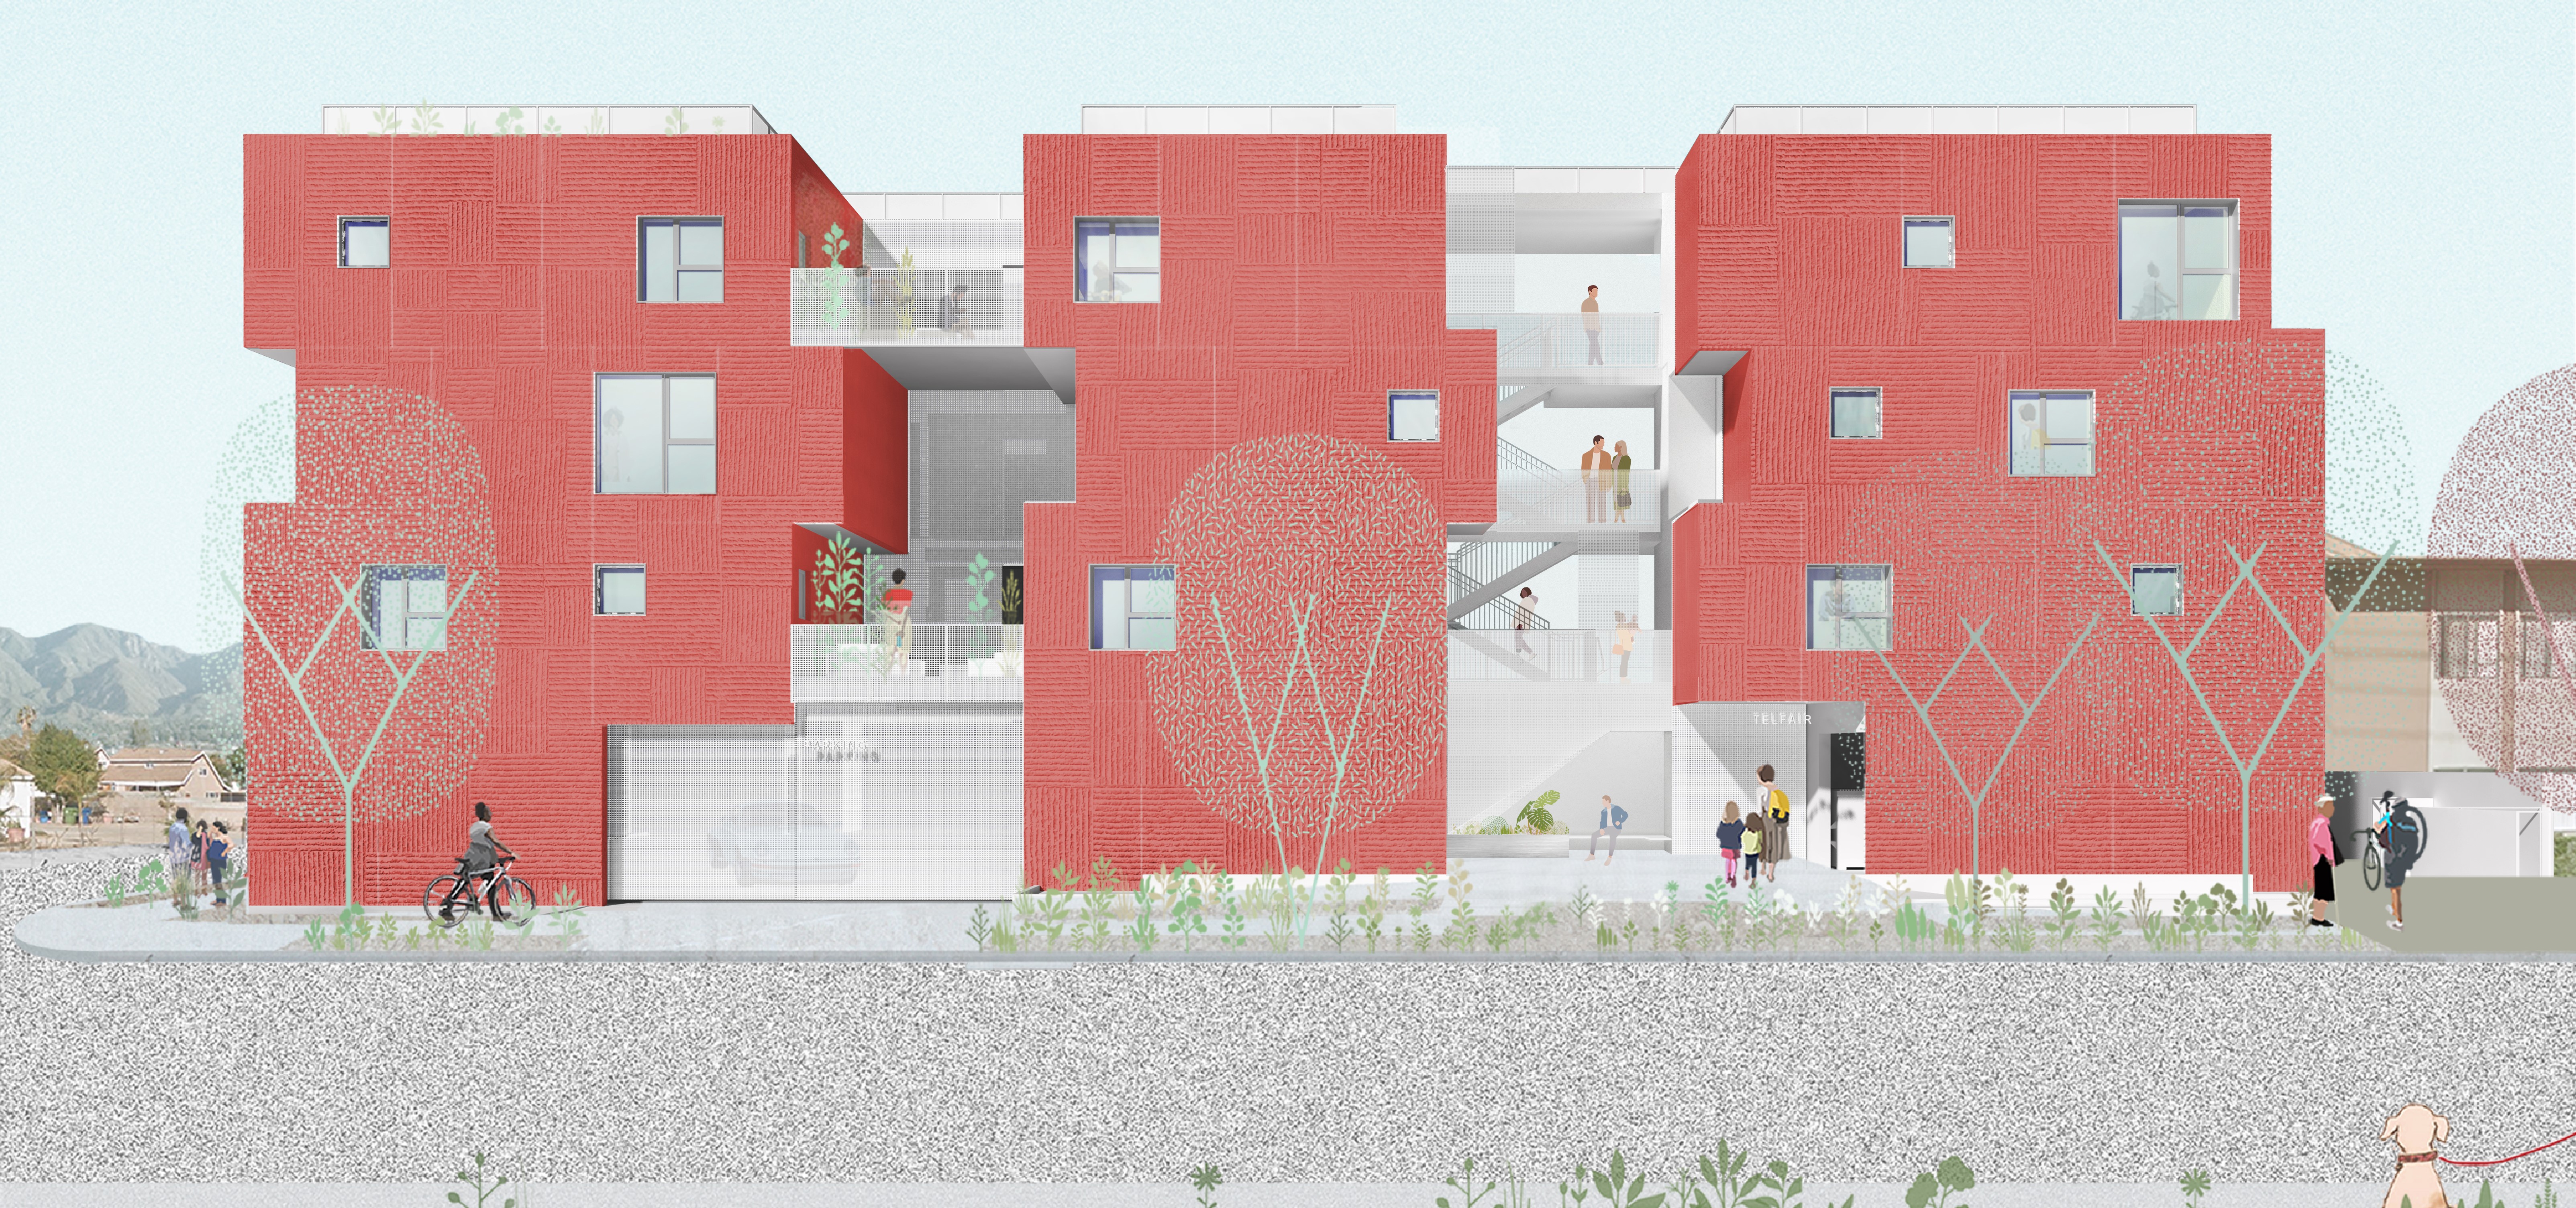 Rendering of 3 red buildings all connected by stair cases with trees in front of buildings.